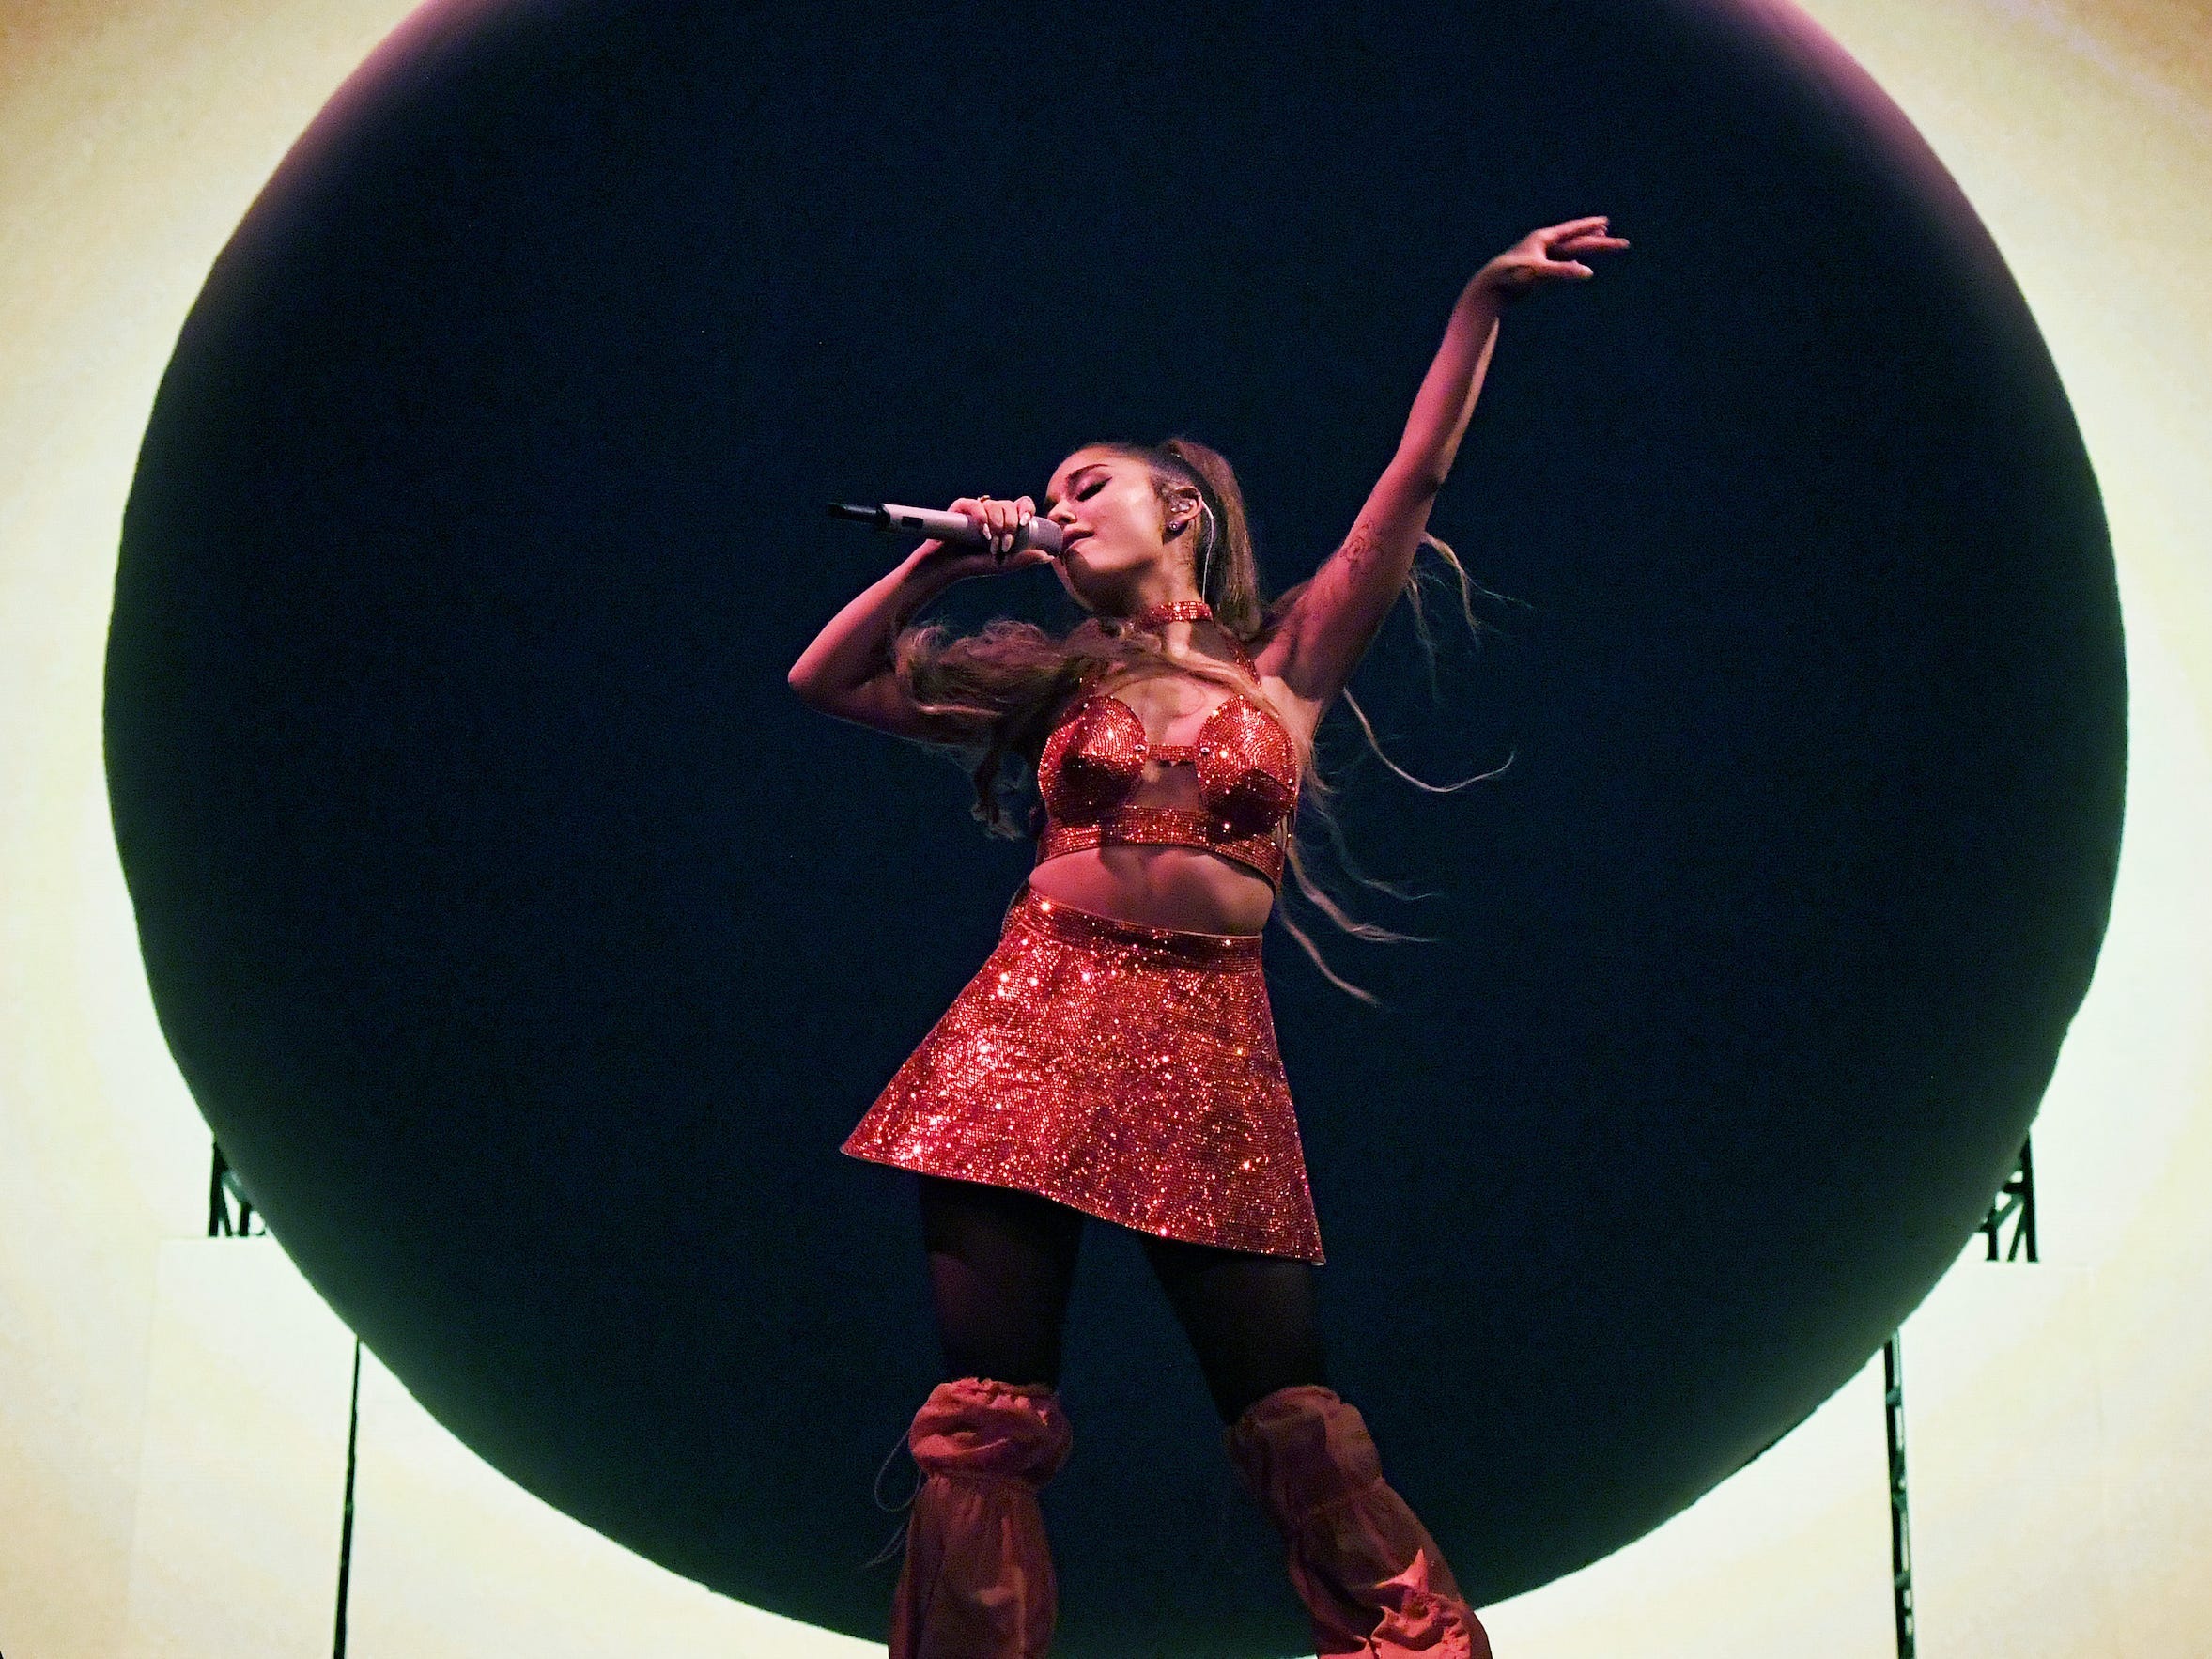 <ul class="summary-list"> <li>Ariana Grande has released seven studio albums since 2013.</li> <li>Business Insider's senior music reporter ranked them from worst to best, using a unique scoring method.</li> <li>"Thank U, Next" took the top spot, while Grande's newest album "Eternal Sunshine" took third place.</li> </ul><p>In the decade-plus since <a href="https://www.businessinsider.com/category/ariana-grande">Ariana Grande</a> released her debut album, she has emerged as one of music's most powerful voices.</p><p>The 30-year-old singer-songwriter <a href="https://www.businessinsider.com/ariana-grande-chart-records-broken-this-year-rain-on-me-2020-6">has broken chart records</a> and racked up streaming numbers with her potent blend of pop, R&B, soul, and '90s diva-worthy vocals.</p><p>Business Insider's senior music reporter ranked all seven of her studio albums from worst to best. The unique scoring method assigns a point total to each song — weighing factors like listenability, ingenuity, and lyrical quality — divided by the total number of songs on each tracklist.</p><p>(Note: Grande's 2015 EP, "Christmas + Chill," and 2019 live album, "K Bye for Now," were not factored into these rankings.)</p><div class="read-original">Read the original article on <a href="https://www.businessinsider.com/ariana-grande-albums-ranked-best-worst">Business Insider</a></div>